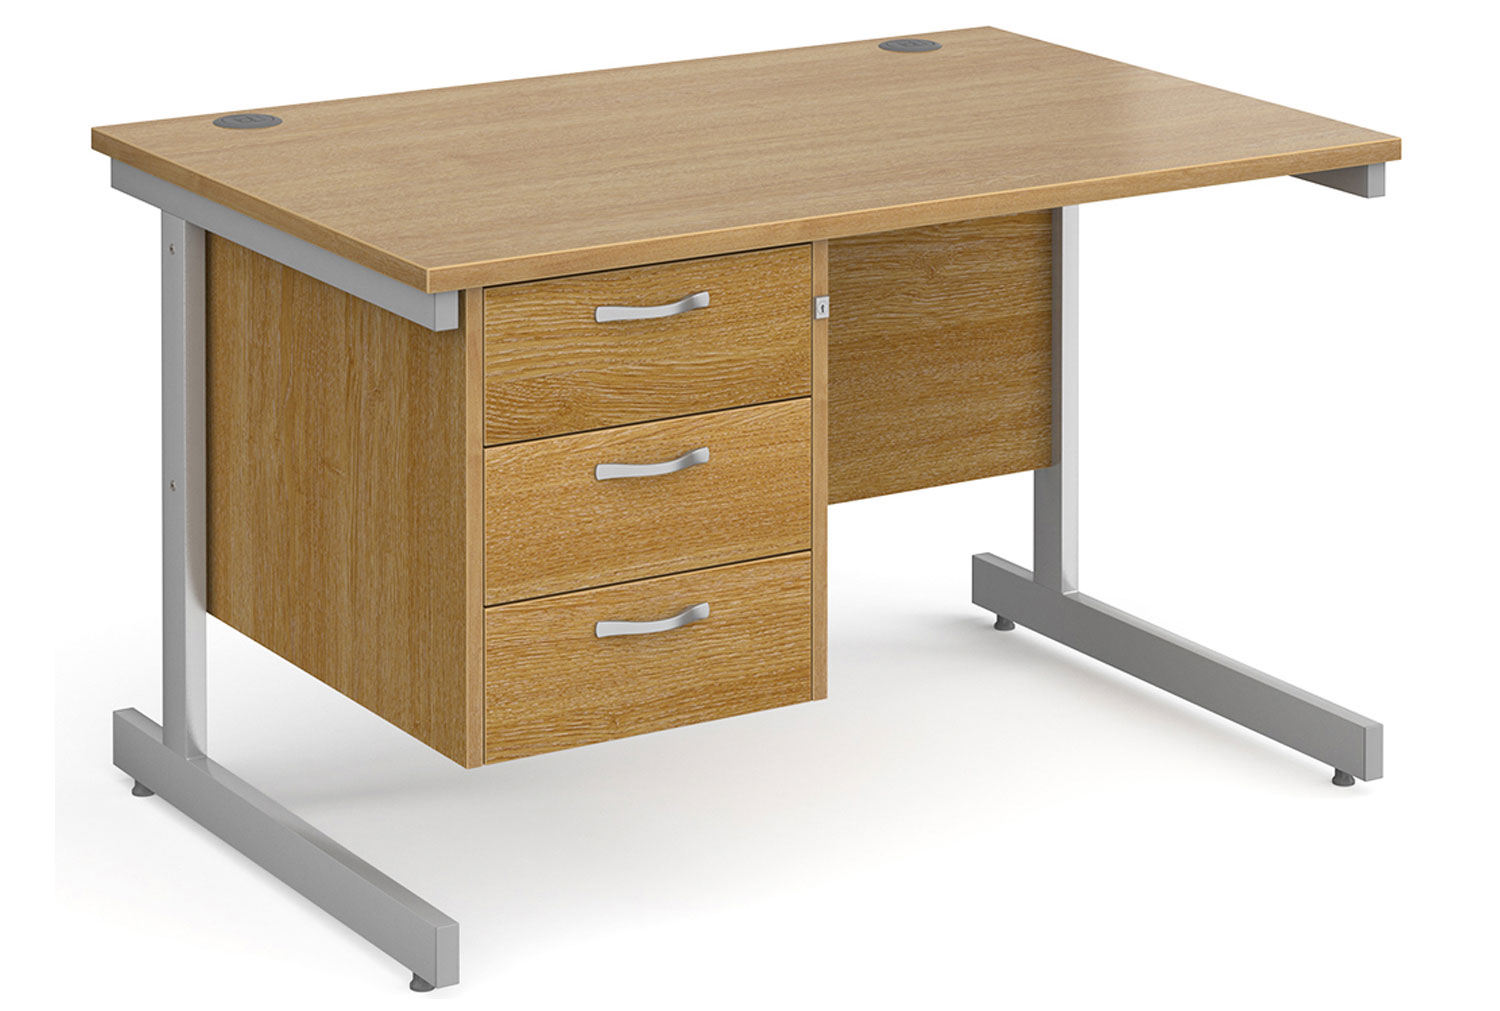 Thrifty Next-Day Rectangular Office Desk 3 Drawers Oak, 120wx80dx73h (cm), Express Delivery